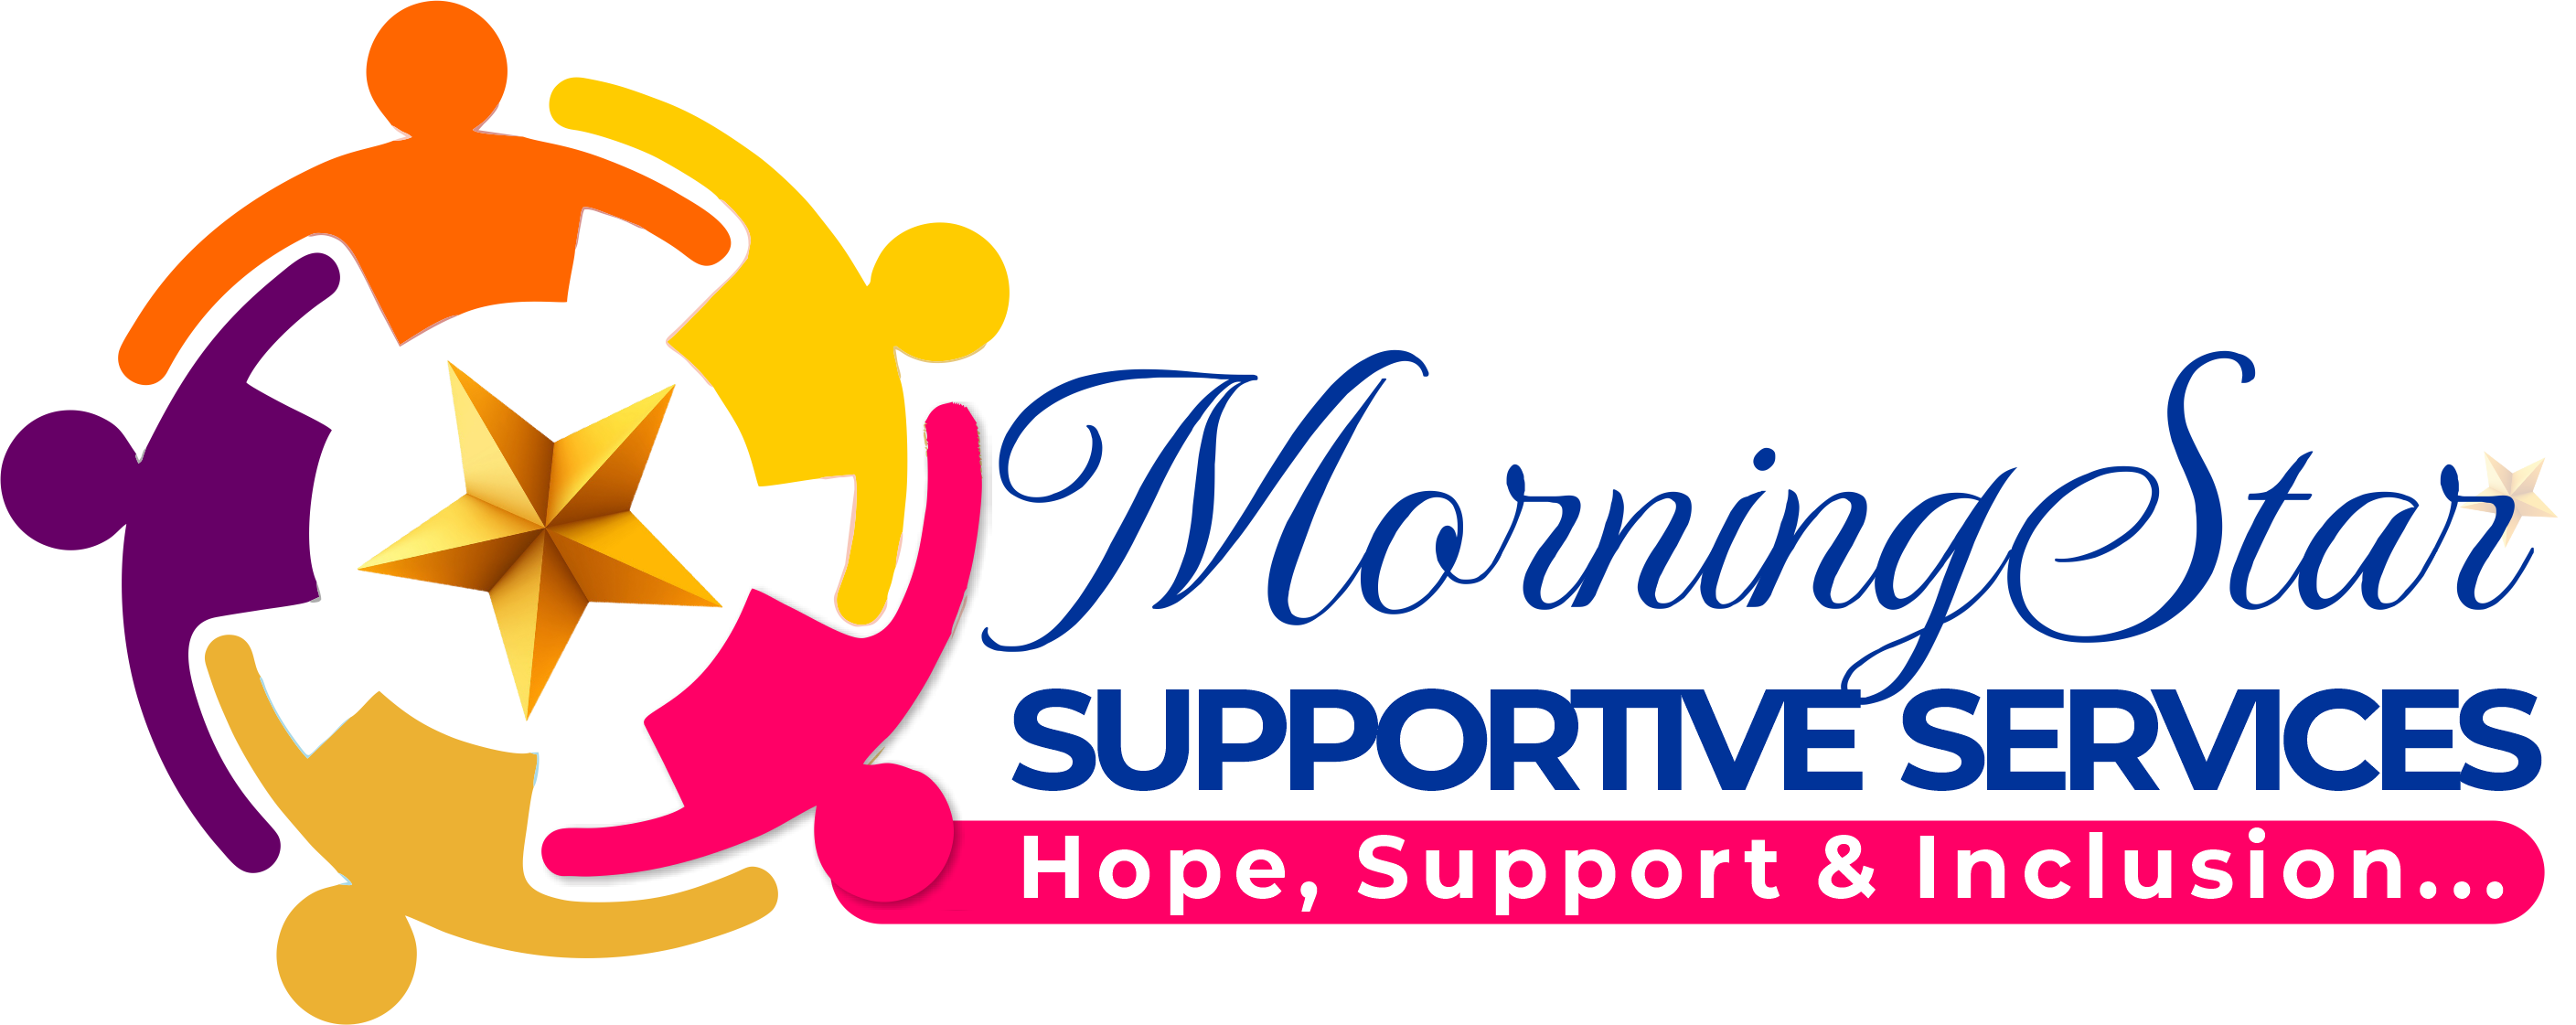 MORNING STAR SUPPORTIVE SERVICES